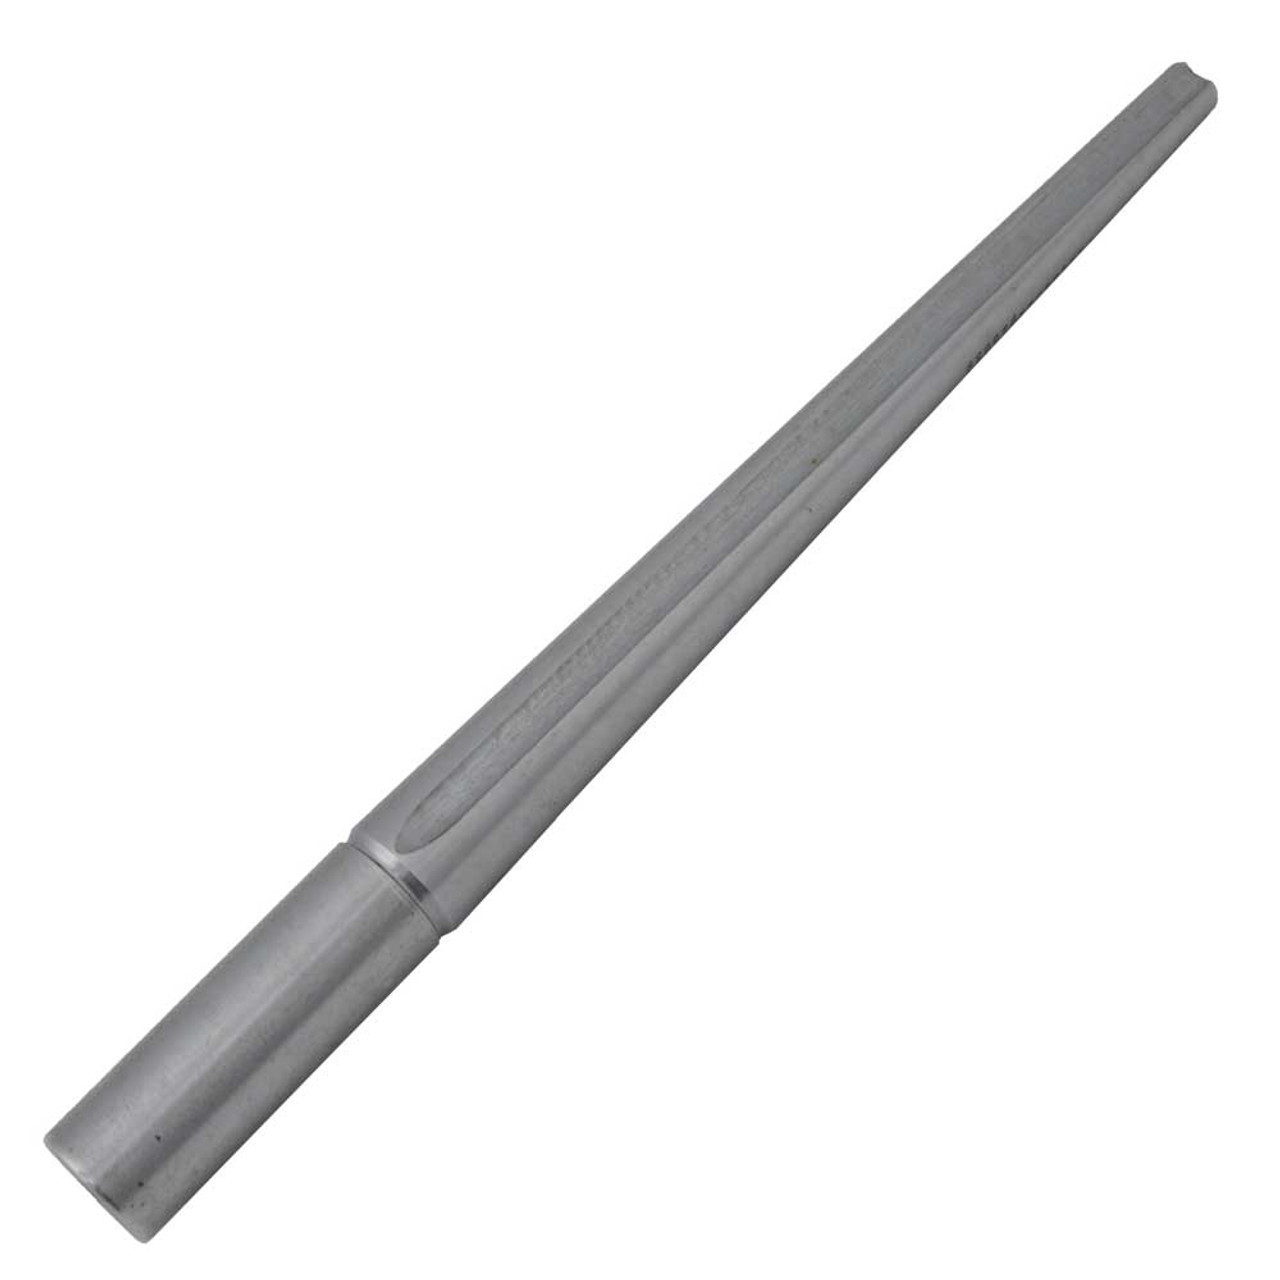 Round Steel Bracelet Mandrel For Forming And Shaping 15 Inches Long